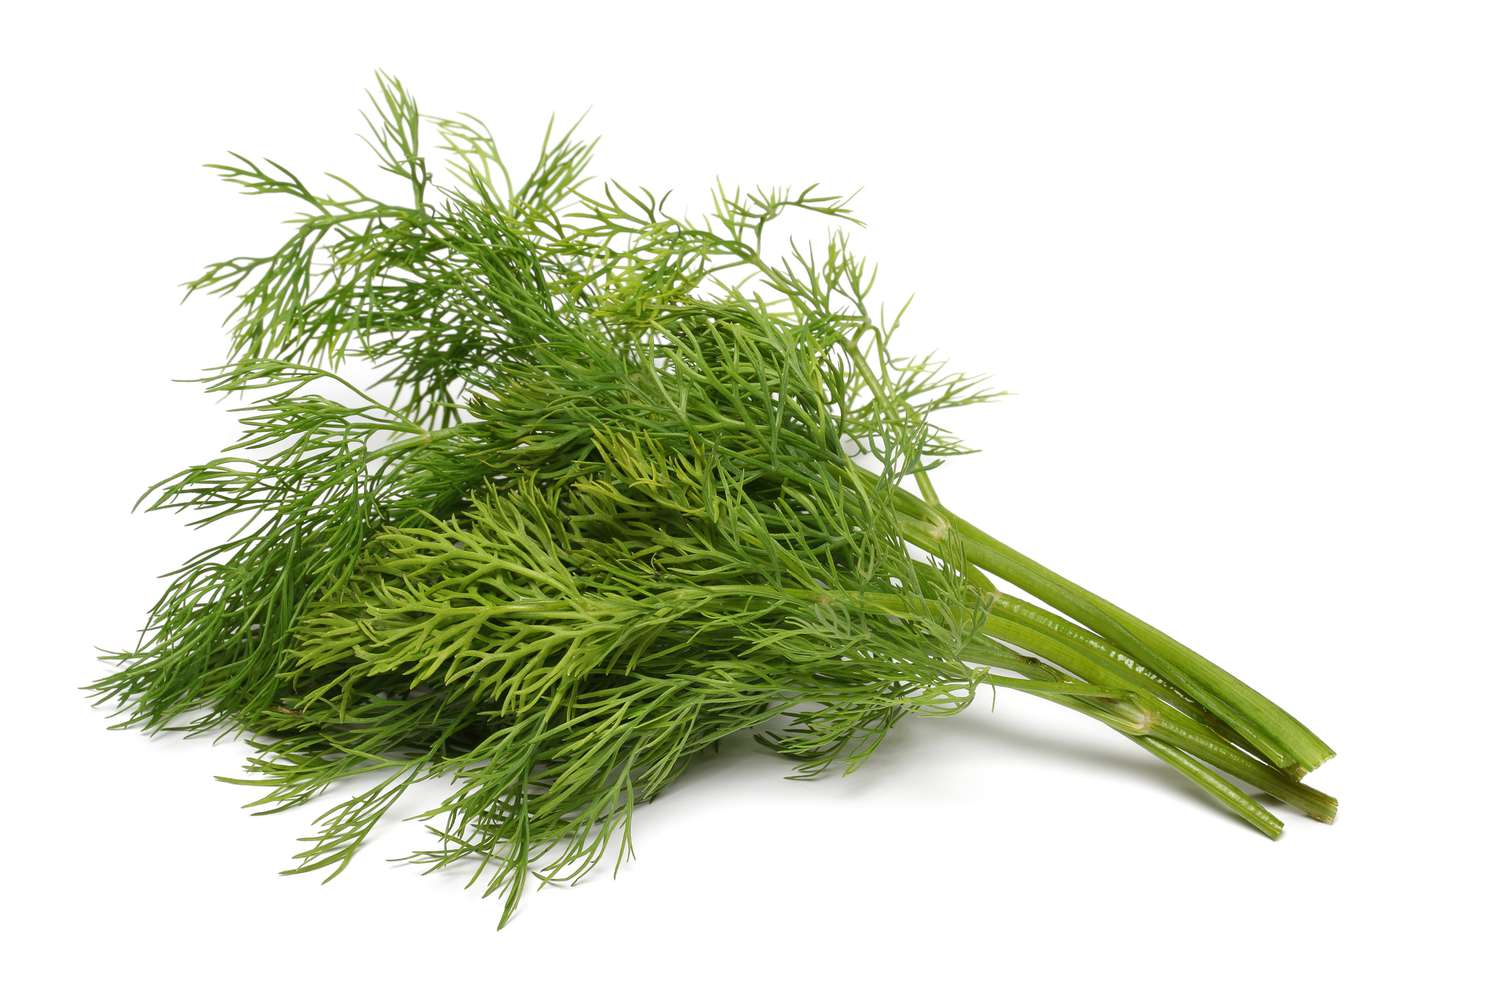 How To Store Fresh Dill Weed